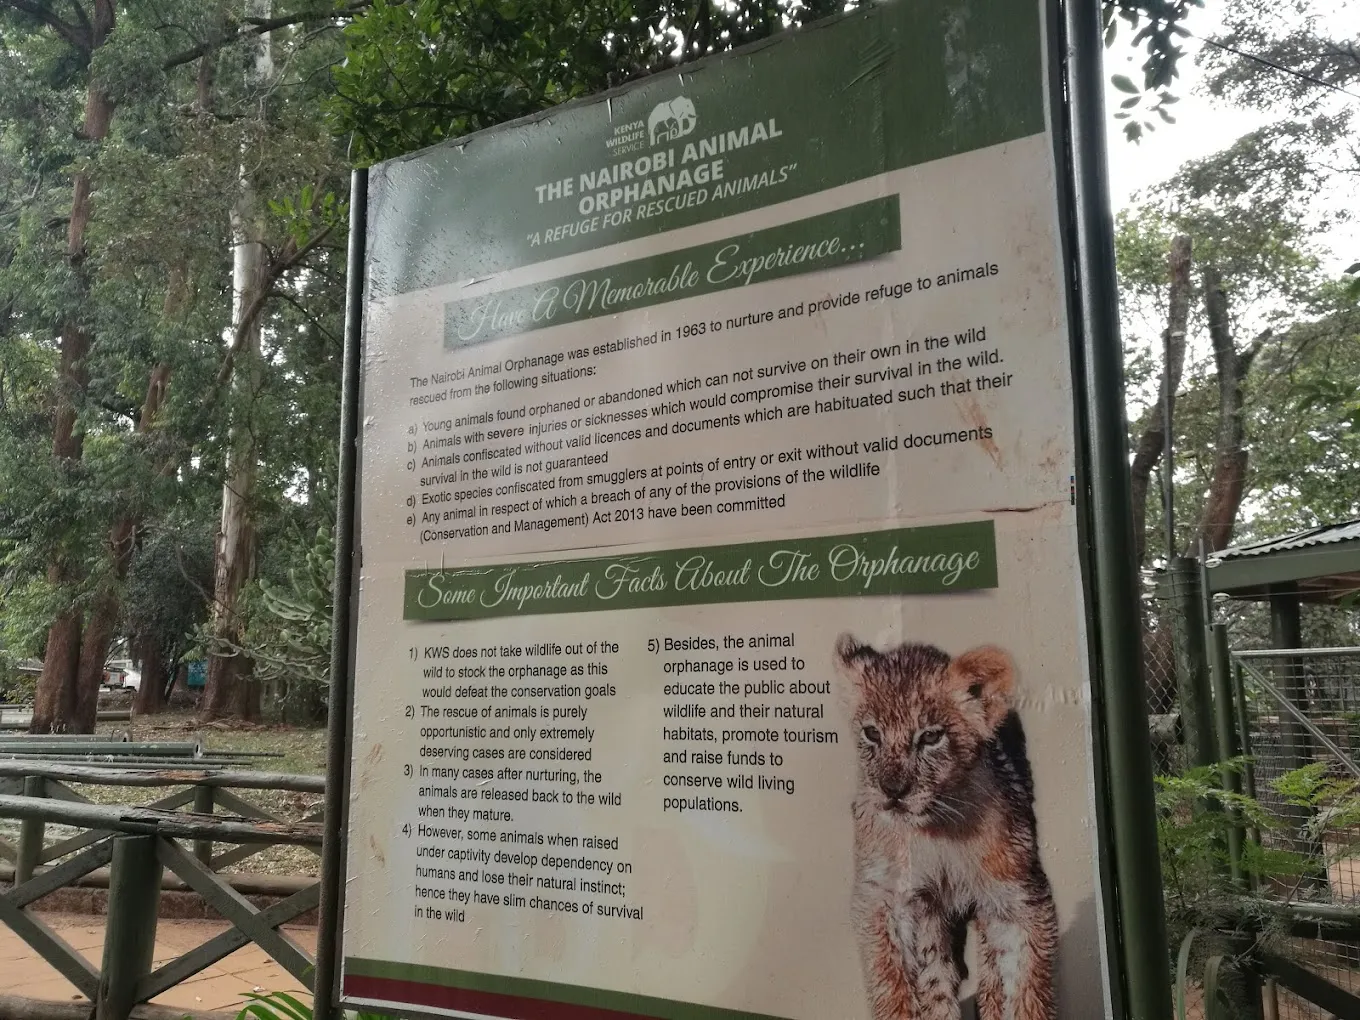 Animal orphanage charges to learn about wildlife conservation - the orphanage is a refuge for orphaned, sick, or injured animals